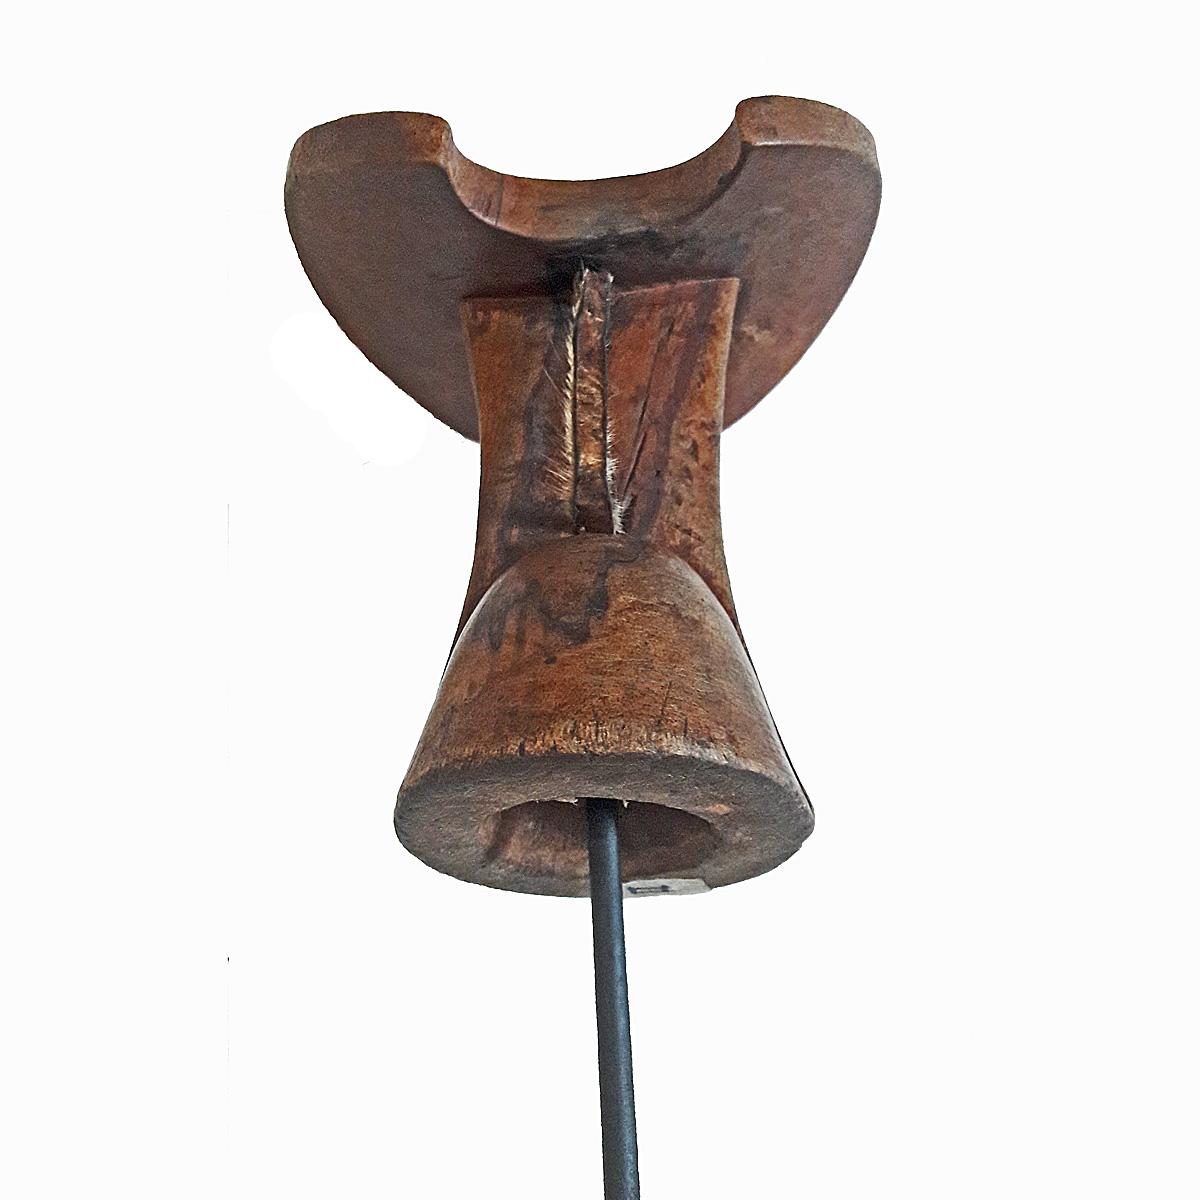 A headrest or stool, hand carved out of a single piece of teak wood, and decorated with traditional carvings, with a braided leather handle. From Ethiopia, late 20th century. Mounted on a black metal stand.